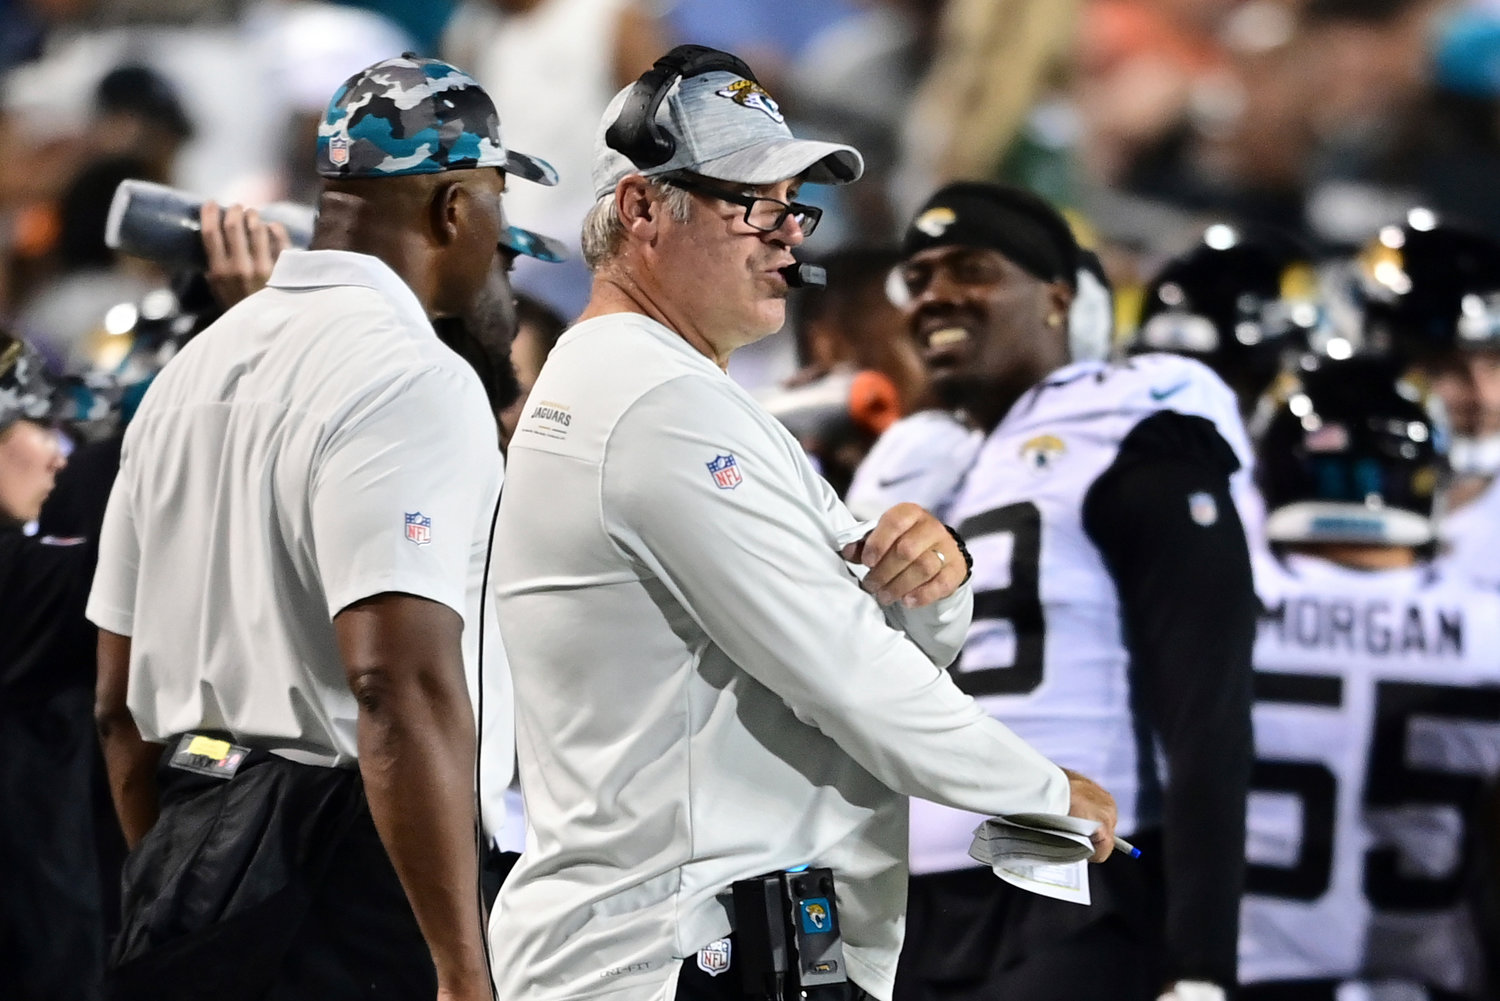 Jacksonville Jaguars coach Doug Pederson, center, watches from the sideline during the first half of the team's NFL football exhibition Hall of Fame Game against the Las Vegas Raiders, Thursday, Aug. 4, 2022, in Canton, Ohio.